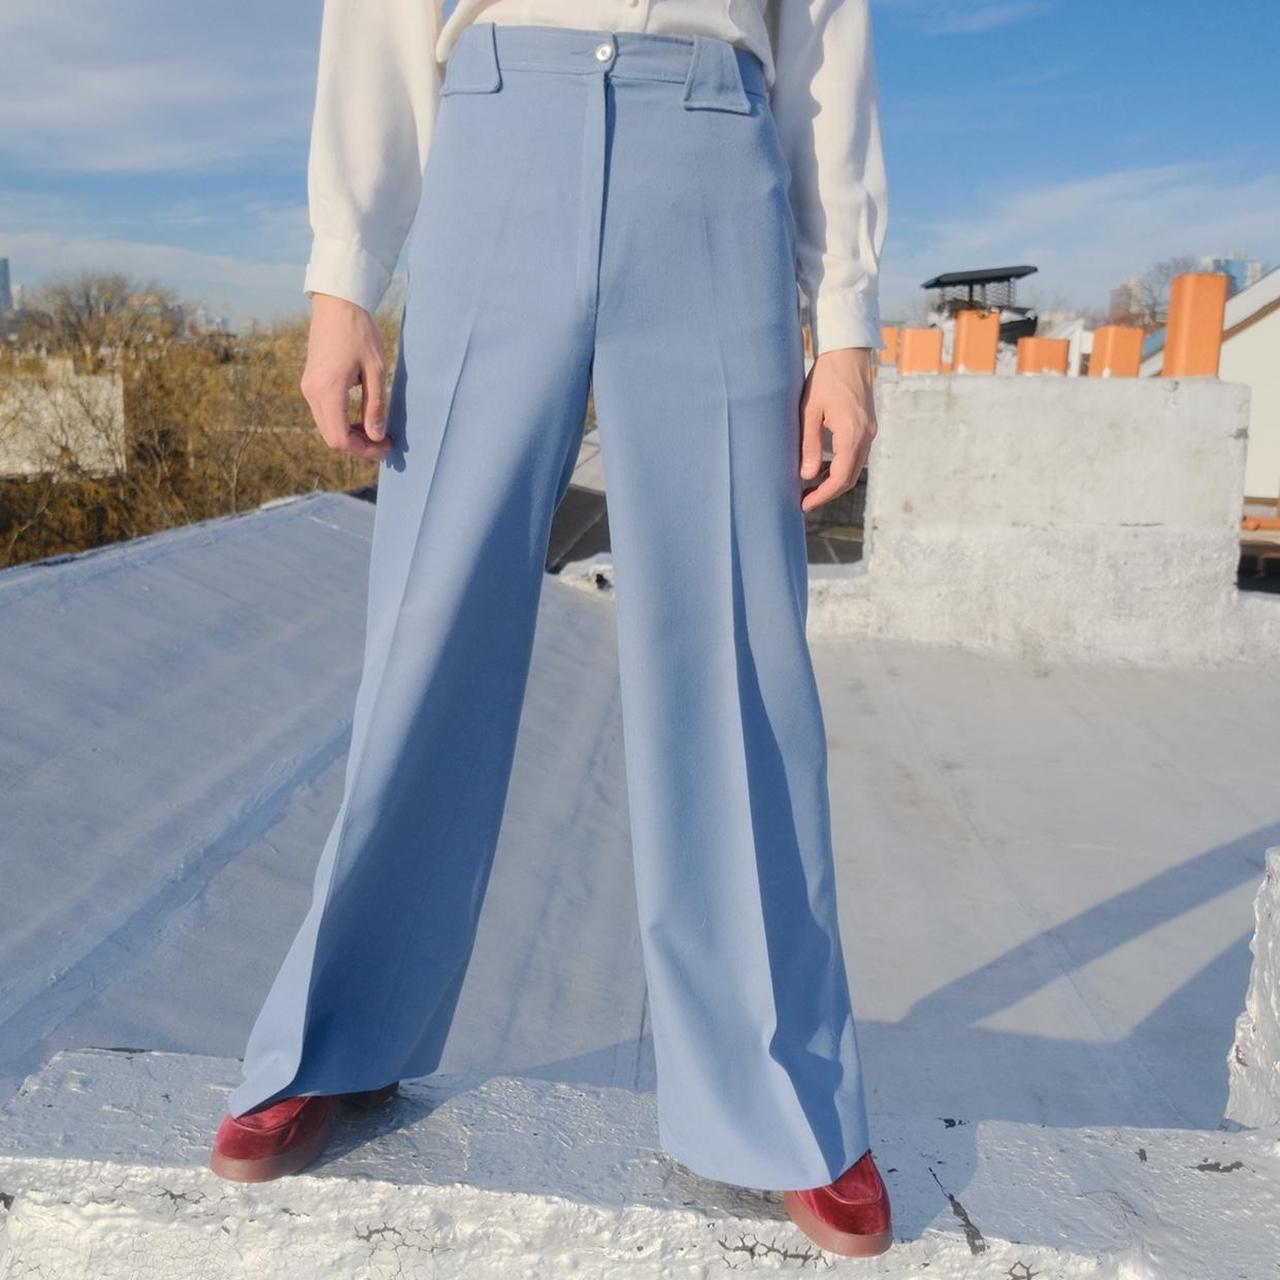 Straight High Waist Trousers  Blue trousers outfit, Blue pants outfit,  Light blue trousers outfit